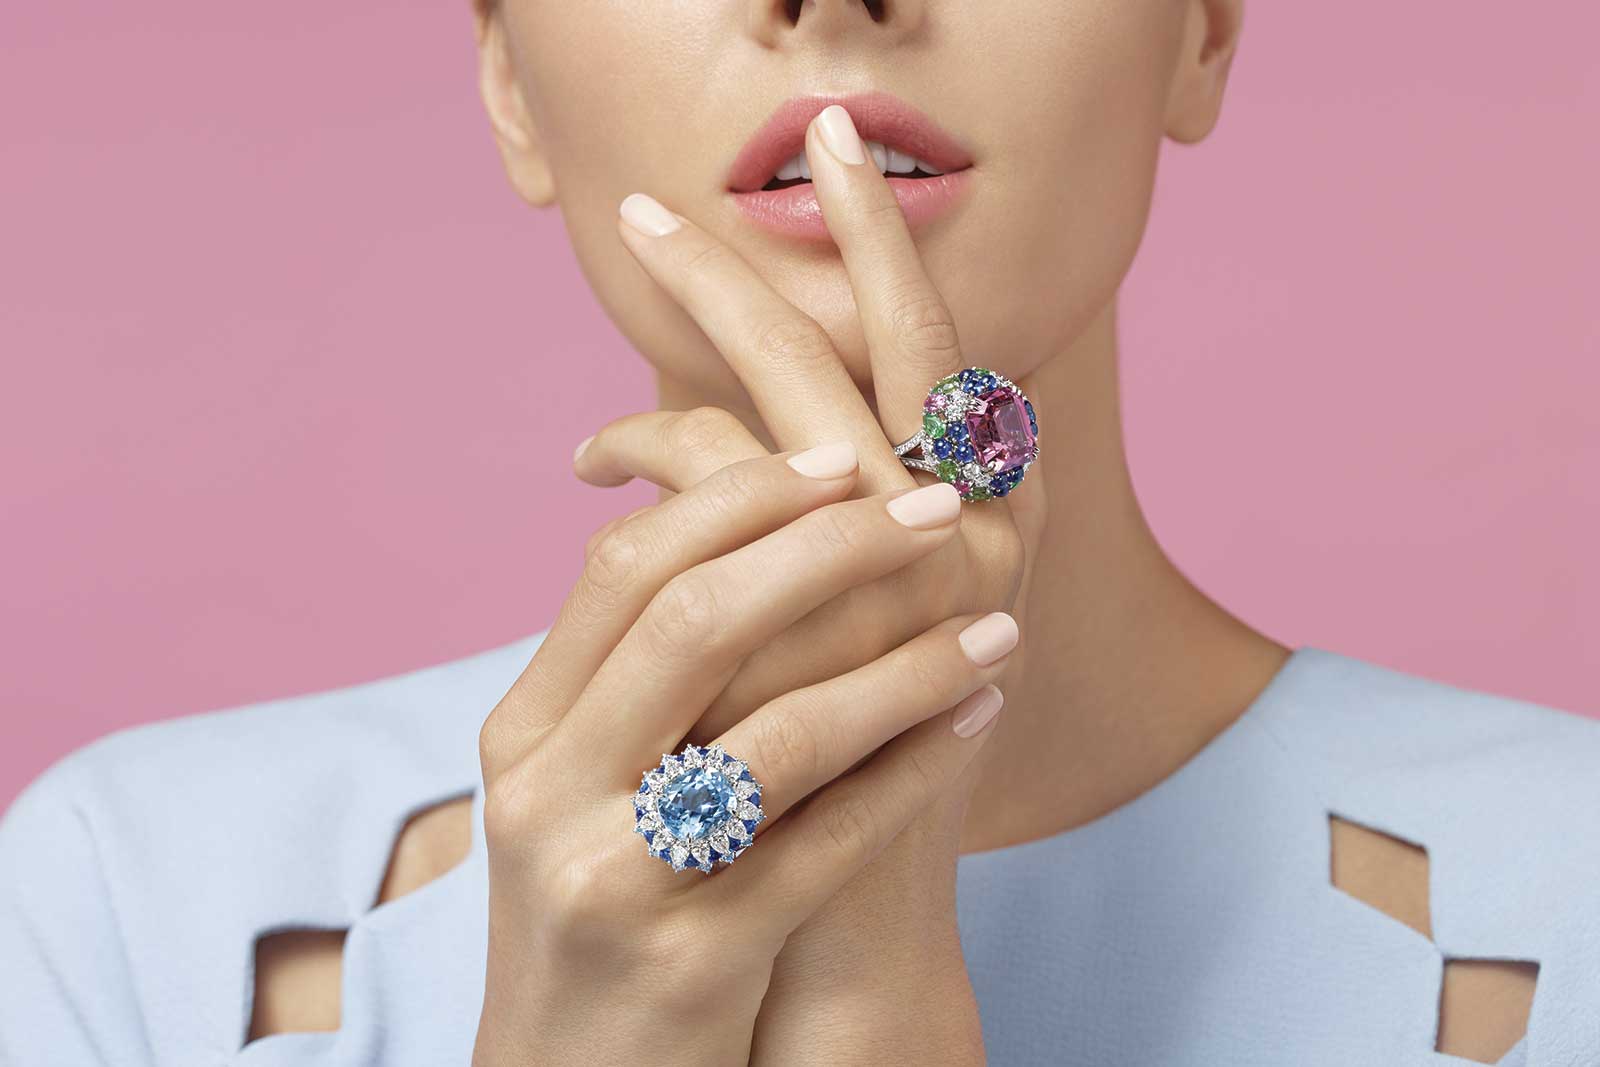 Harry Winston 'Winston Candy' rings (from left to right) with 5.48ct cushion cut aquamarine, sapphires, accenting aquamarines, and diamonds, and with emerald cut 17.48ct purplish pink spinel with tsavorite garnets, pink sapphires, blue sapphires and diamonds 